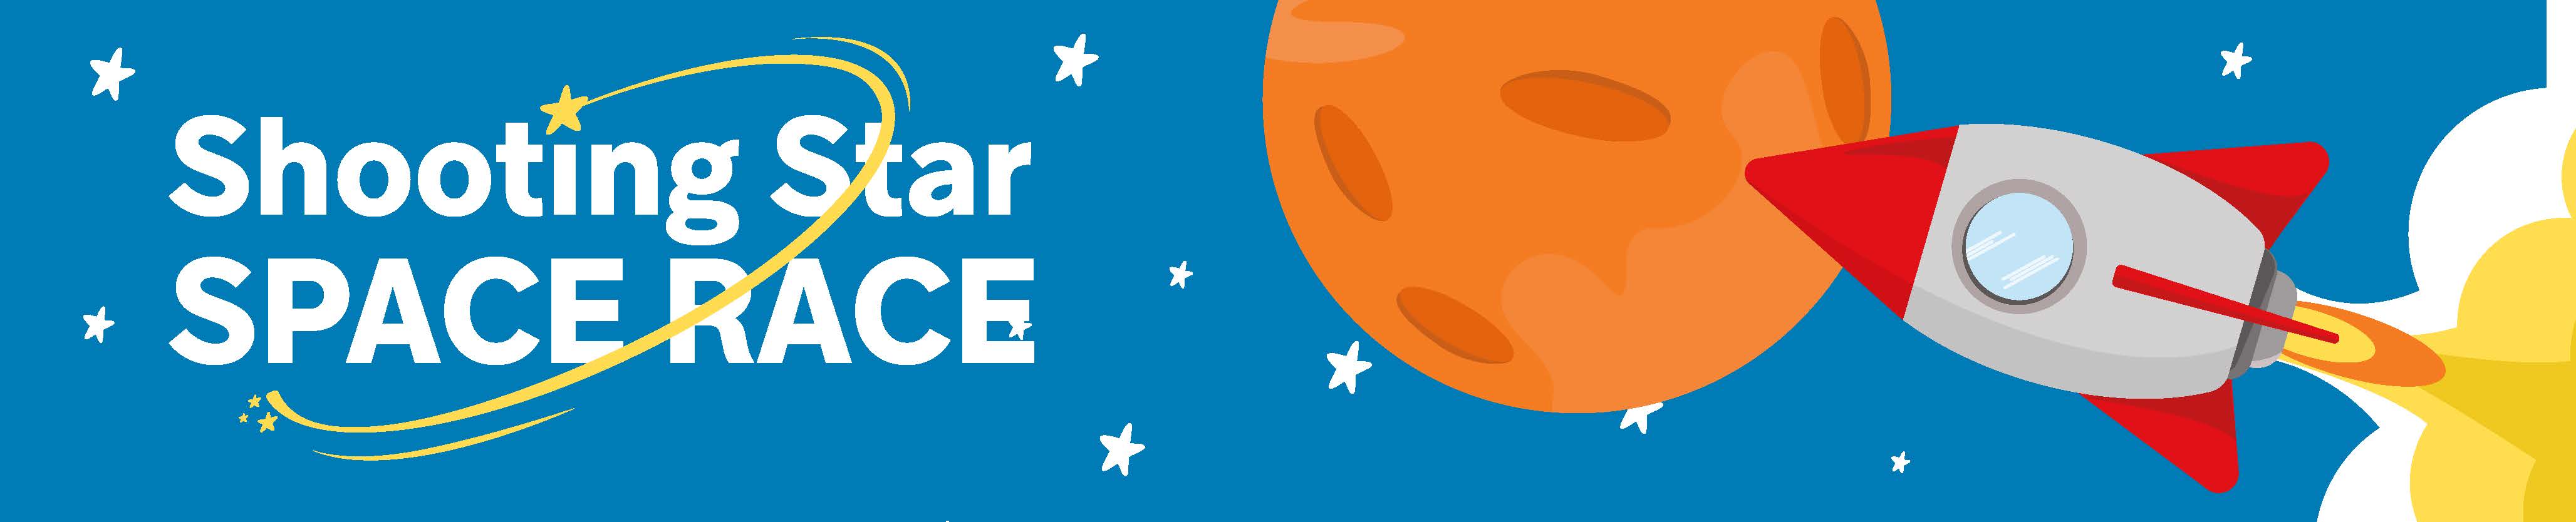 Shooting Star SPACE RACE Banner